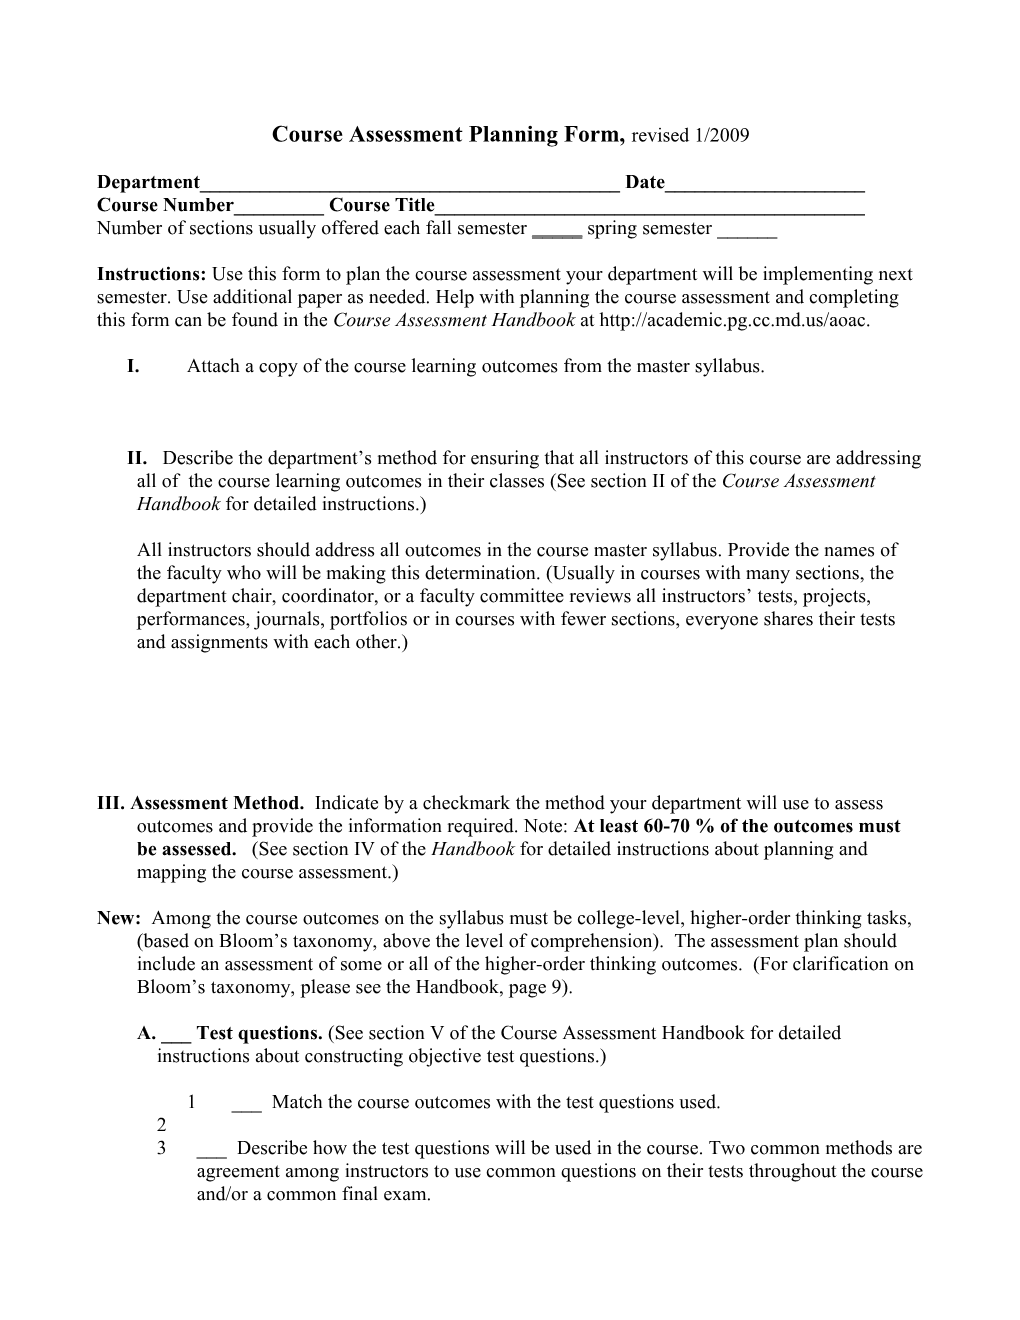 Course Assessment Planning Form, Revised Draft11/21/2002 s1